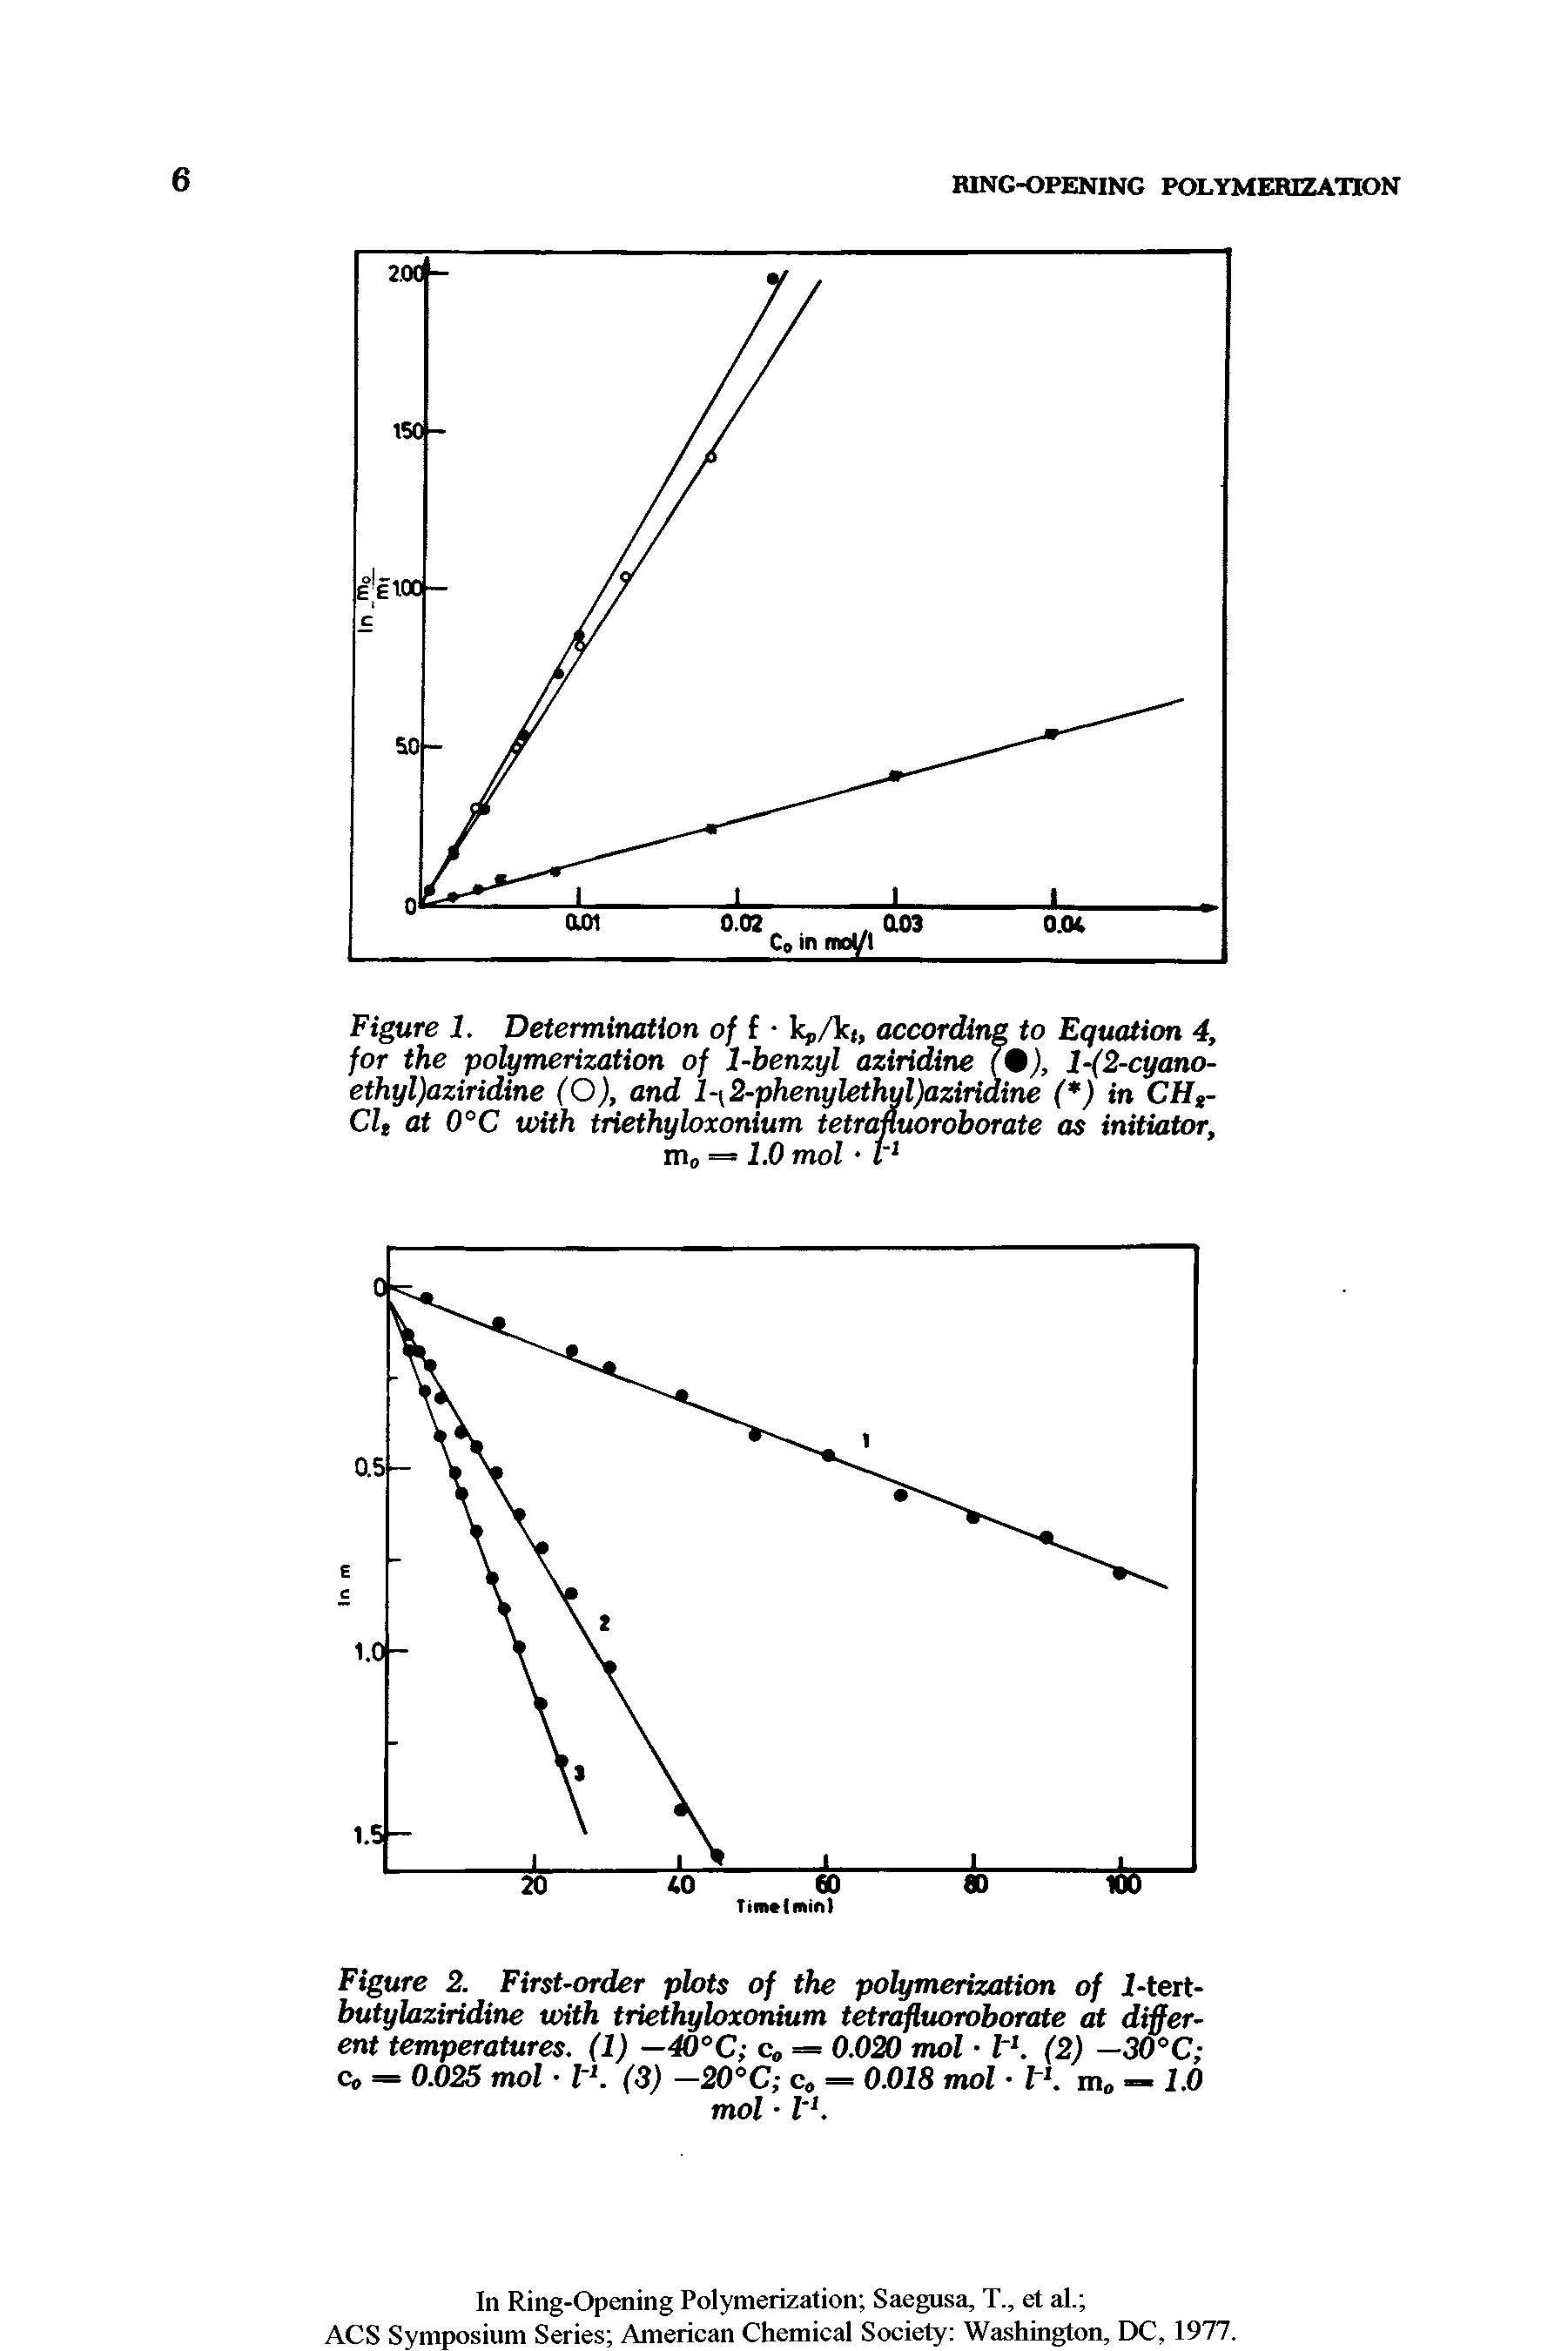 Figure 1. Determination of f k,A<, according to Equation 4, for the polymerization of 1-benzyl aziridine 1 2-cyano-ethyl)aziridine (O), and l- 2-phenyletlwl)aziridine ( ) in CHy Clt at 0°C uHth triethyloxonium tetrafluoroborate as initiator, mo = 1.0 mol r ...